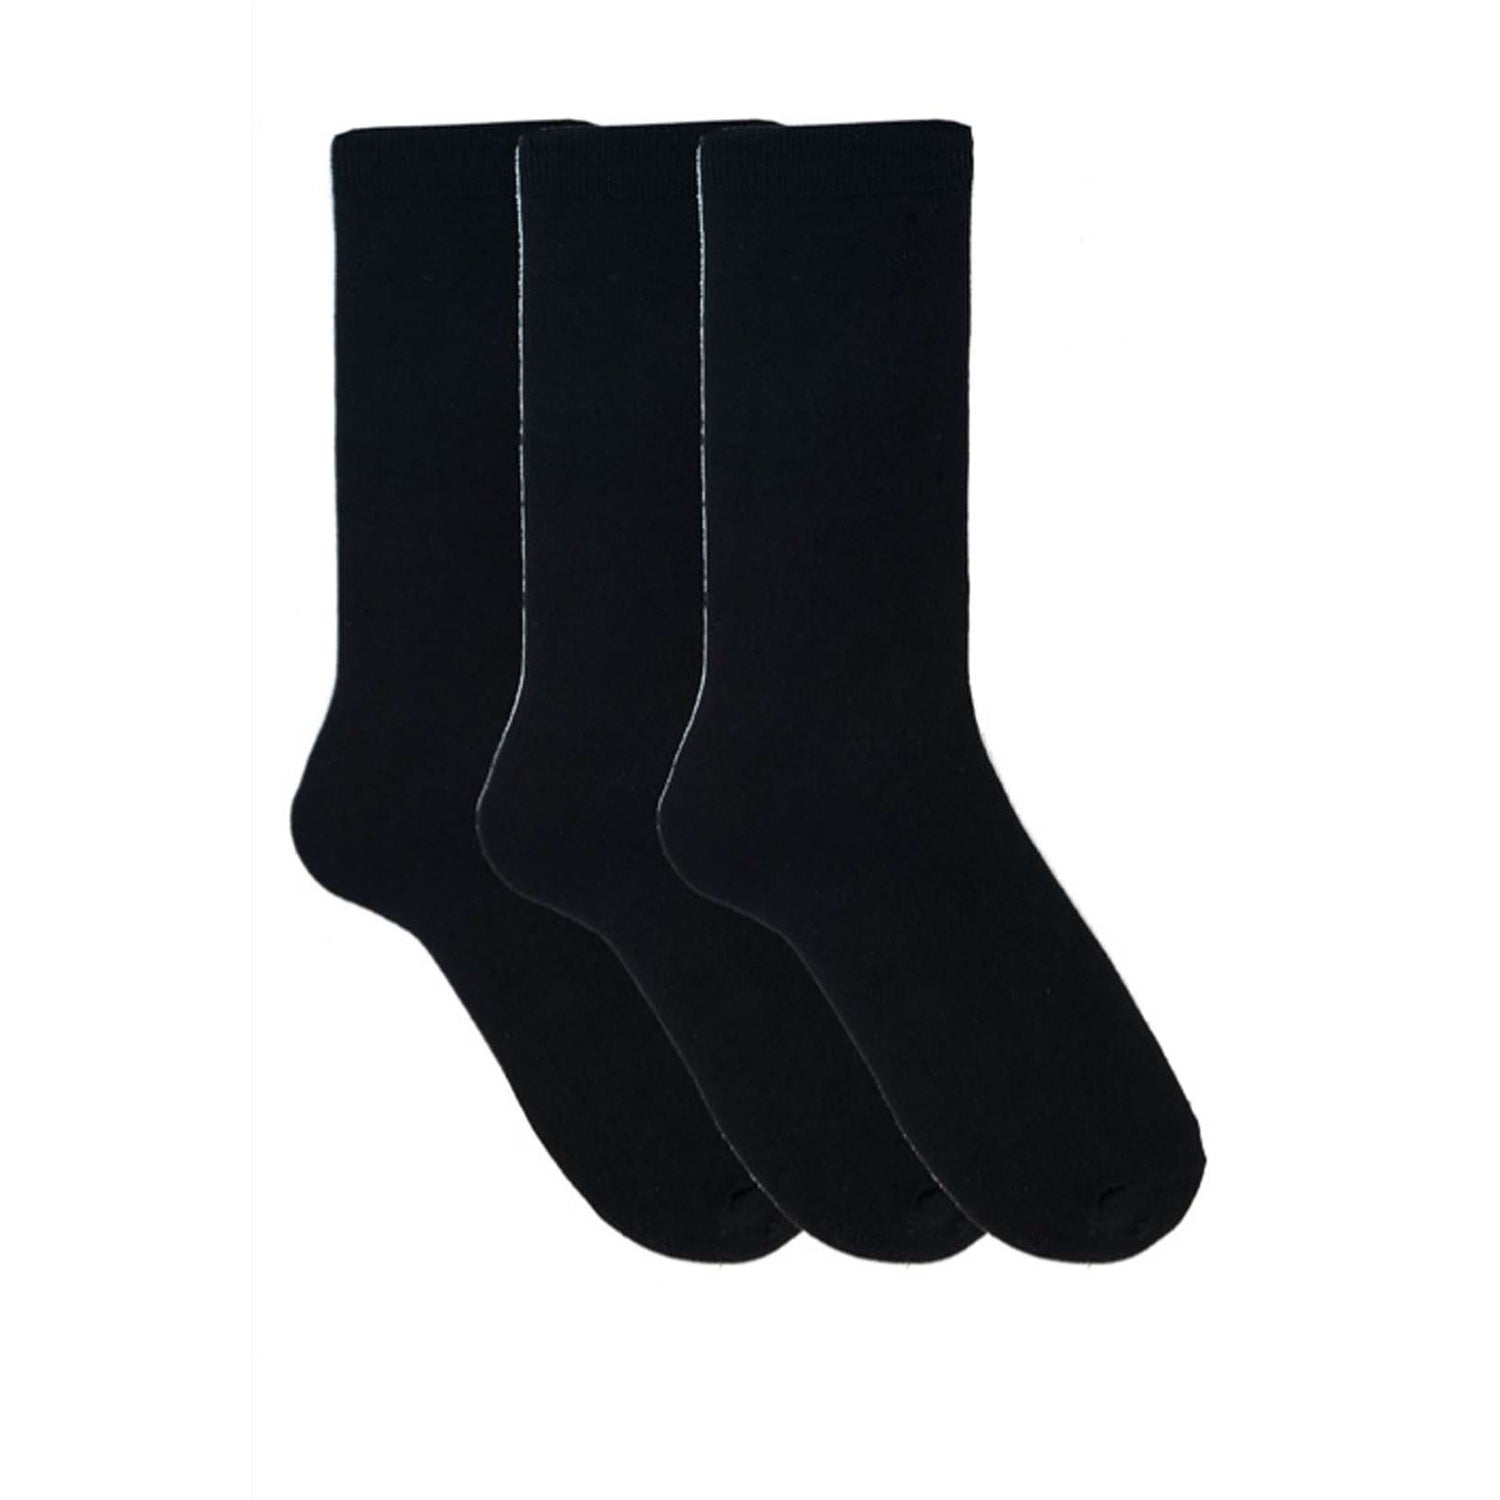 Mens Cotton Rich Plain Black Socks (Pack Of 3) | Discounts on great Brands